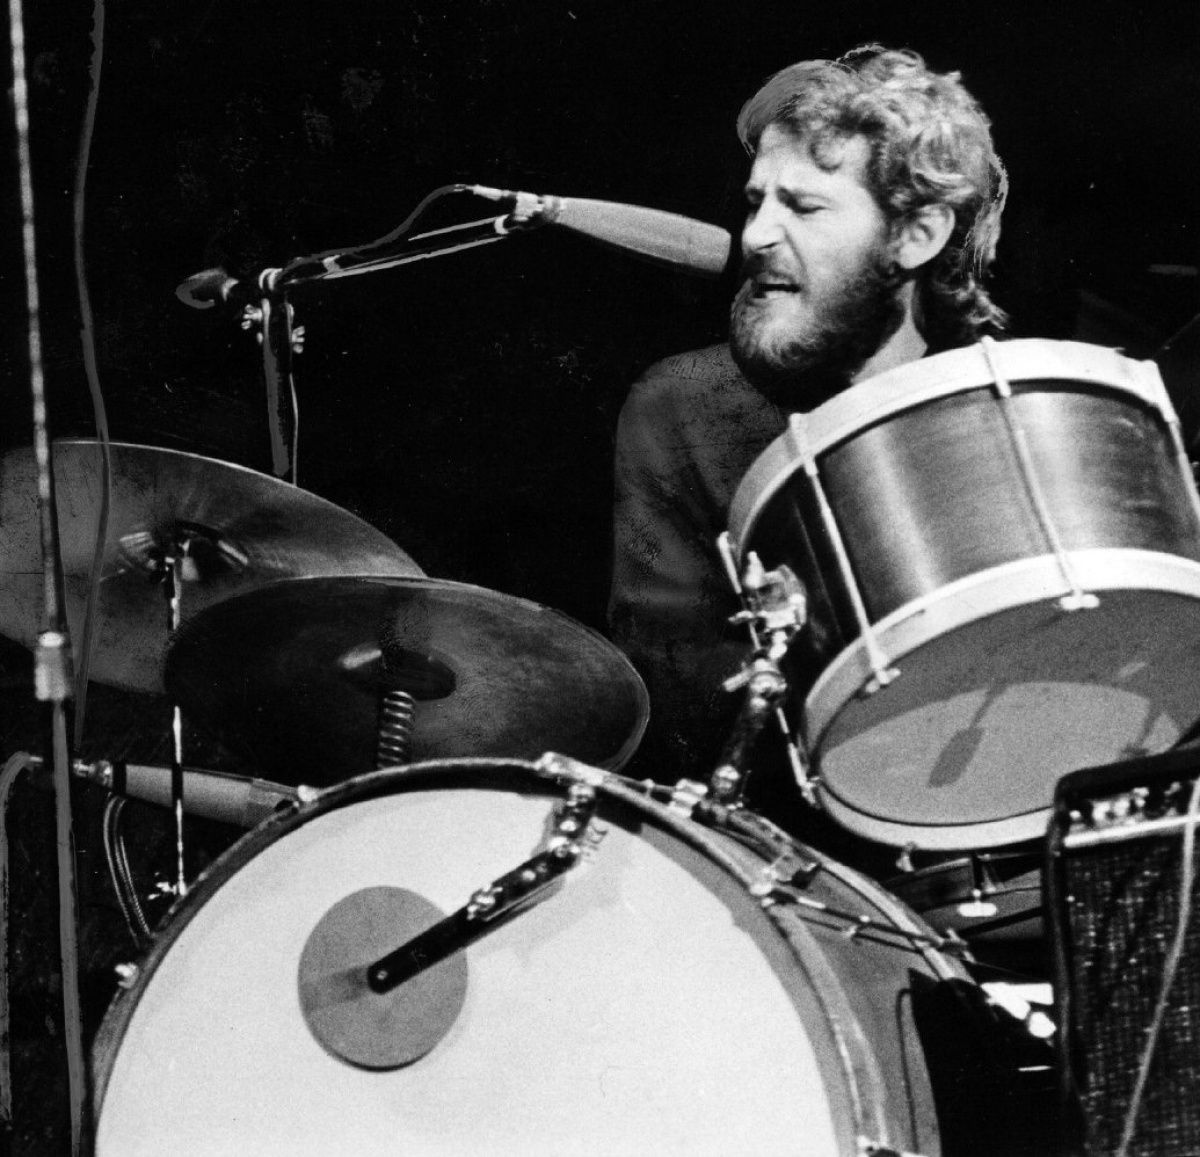 We all love musical architecture there's no doubt about that.

#LevonHelm
#RIP

#TheBand - Up On Cripple Creek
Live, The Ed Sullivan Show, 1969.
youtu.be/NKu0OTDvQ-w

The Weight
Live at The Syria Mosque, Pittsburgh, PA, 1970.
youtu.be/N79OAlMi2nI